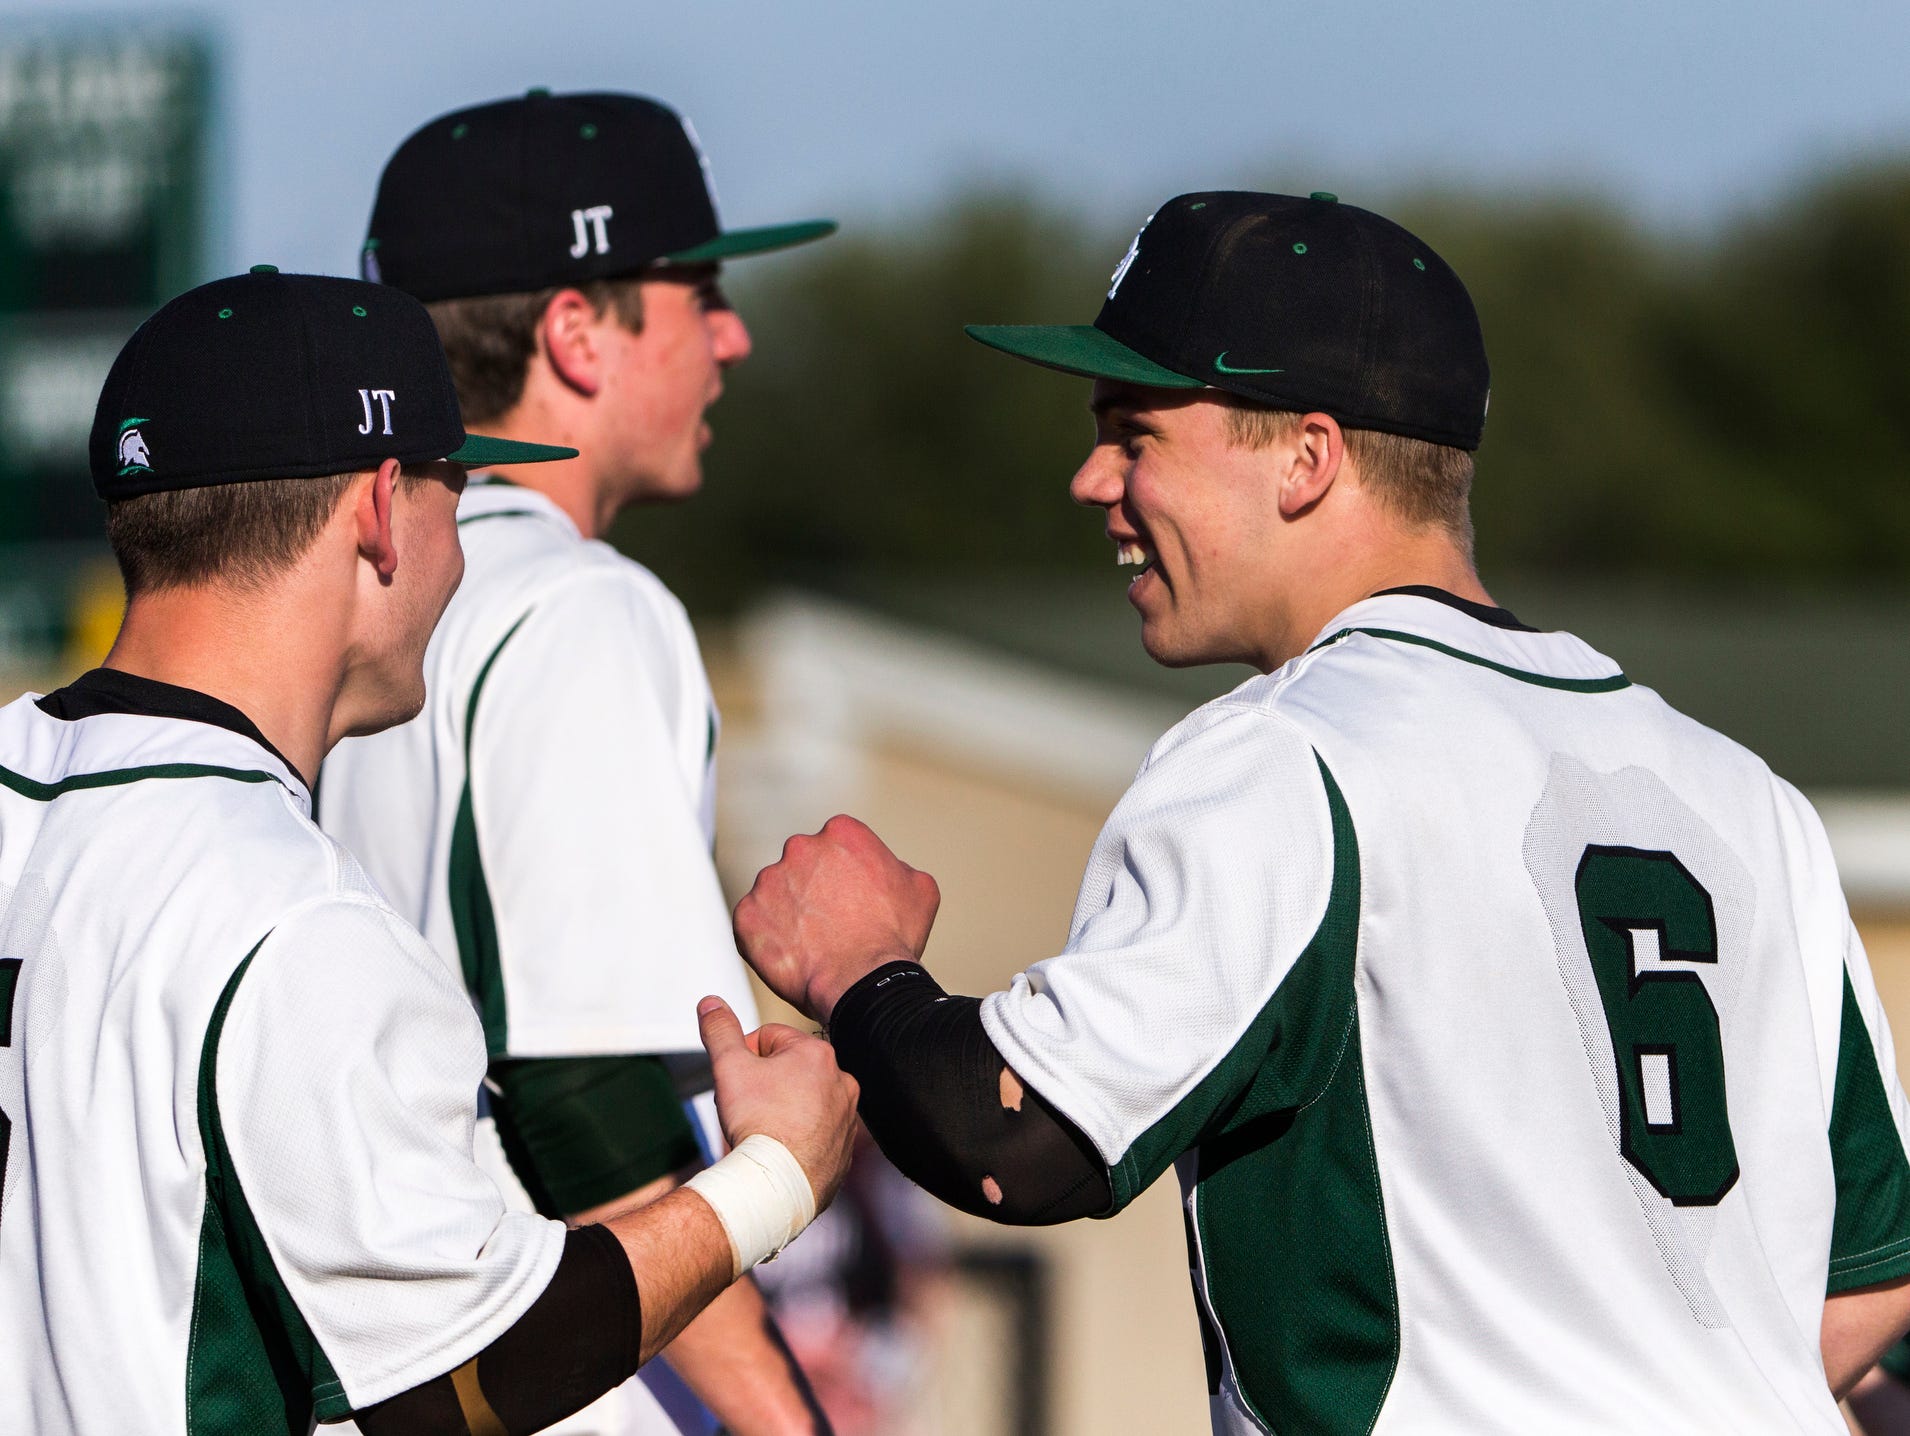 St. Mark's pitcher Andrew Reich (No. 6) celebrates with teammates after throwing a no-hitter in St. Mark's 12-0 win over Hodgson at St. Mark's High School on Wednesday afternoon.